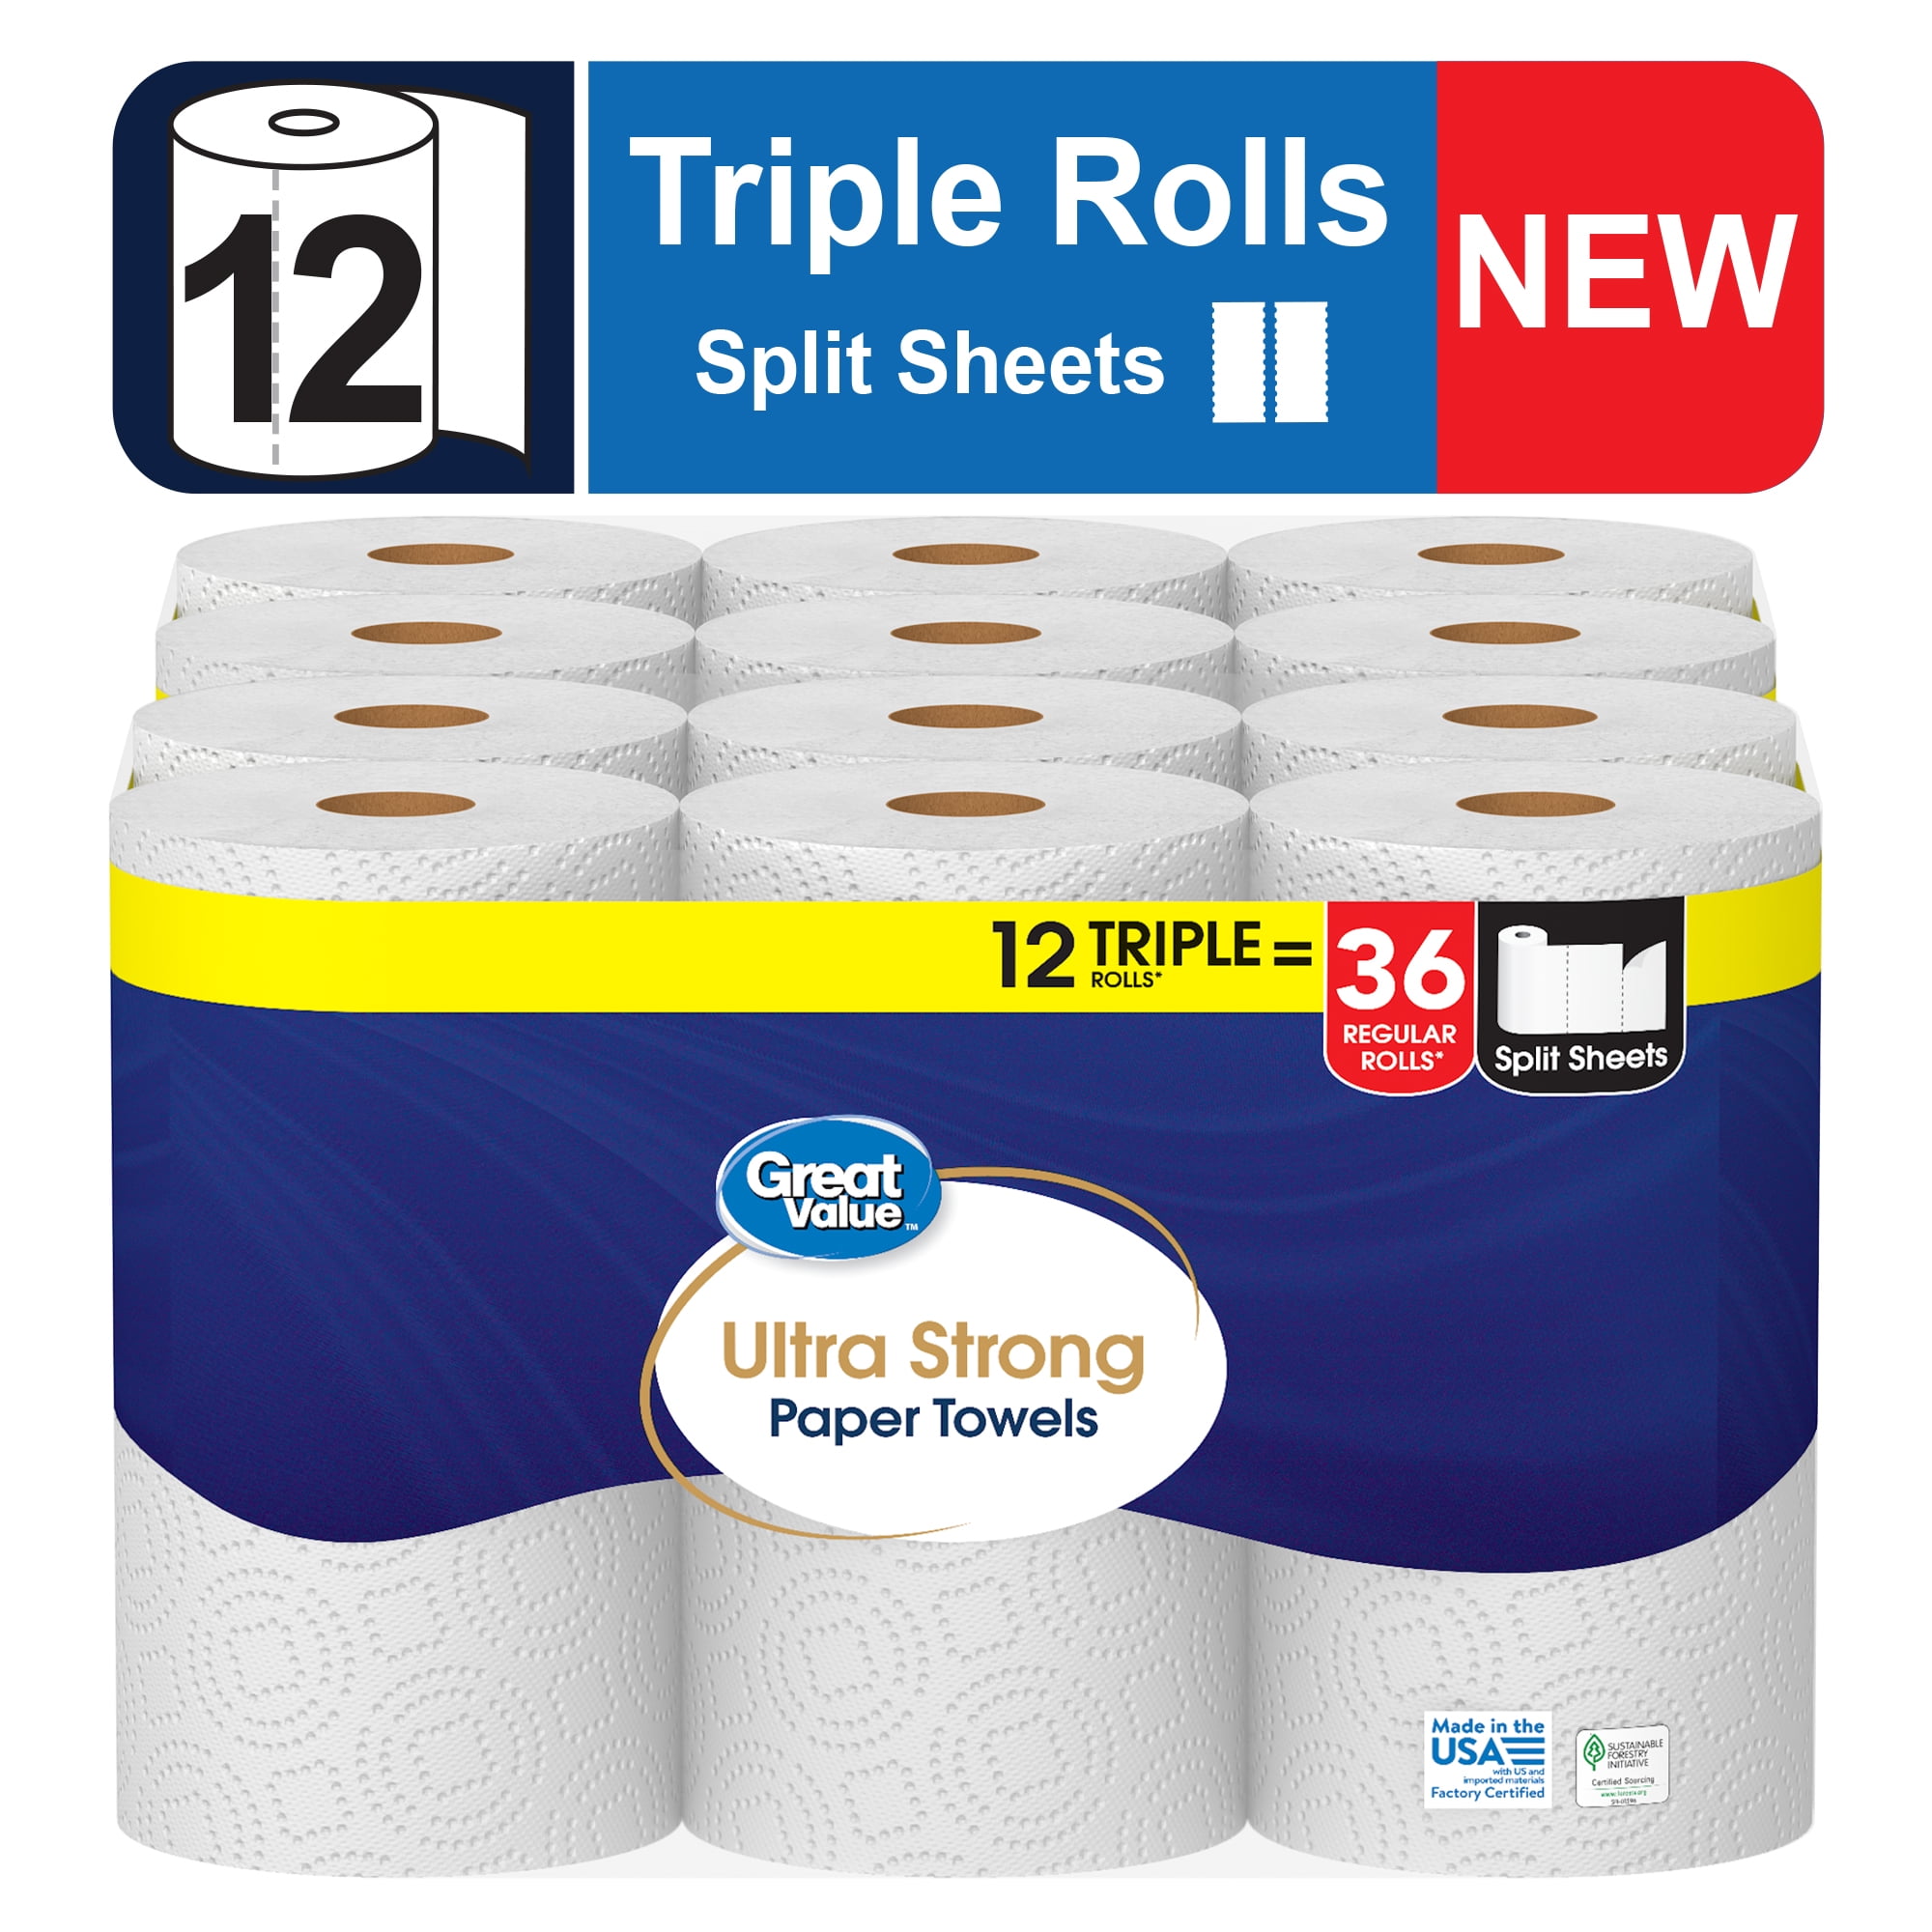 Great Value Ultra Strong Paper Towels, White, 12 Triple Rolls - Walmart.com